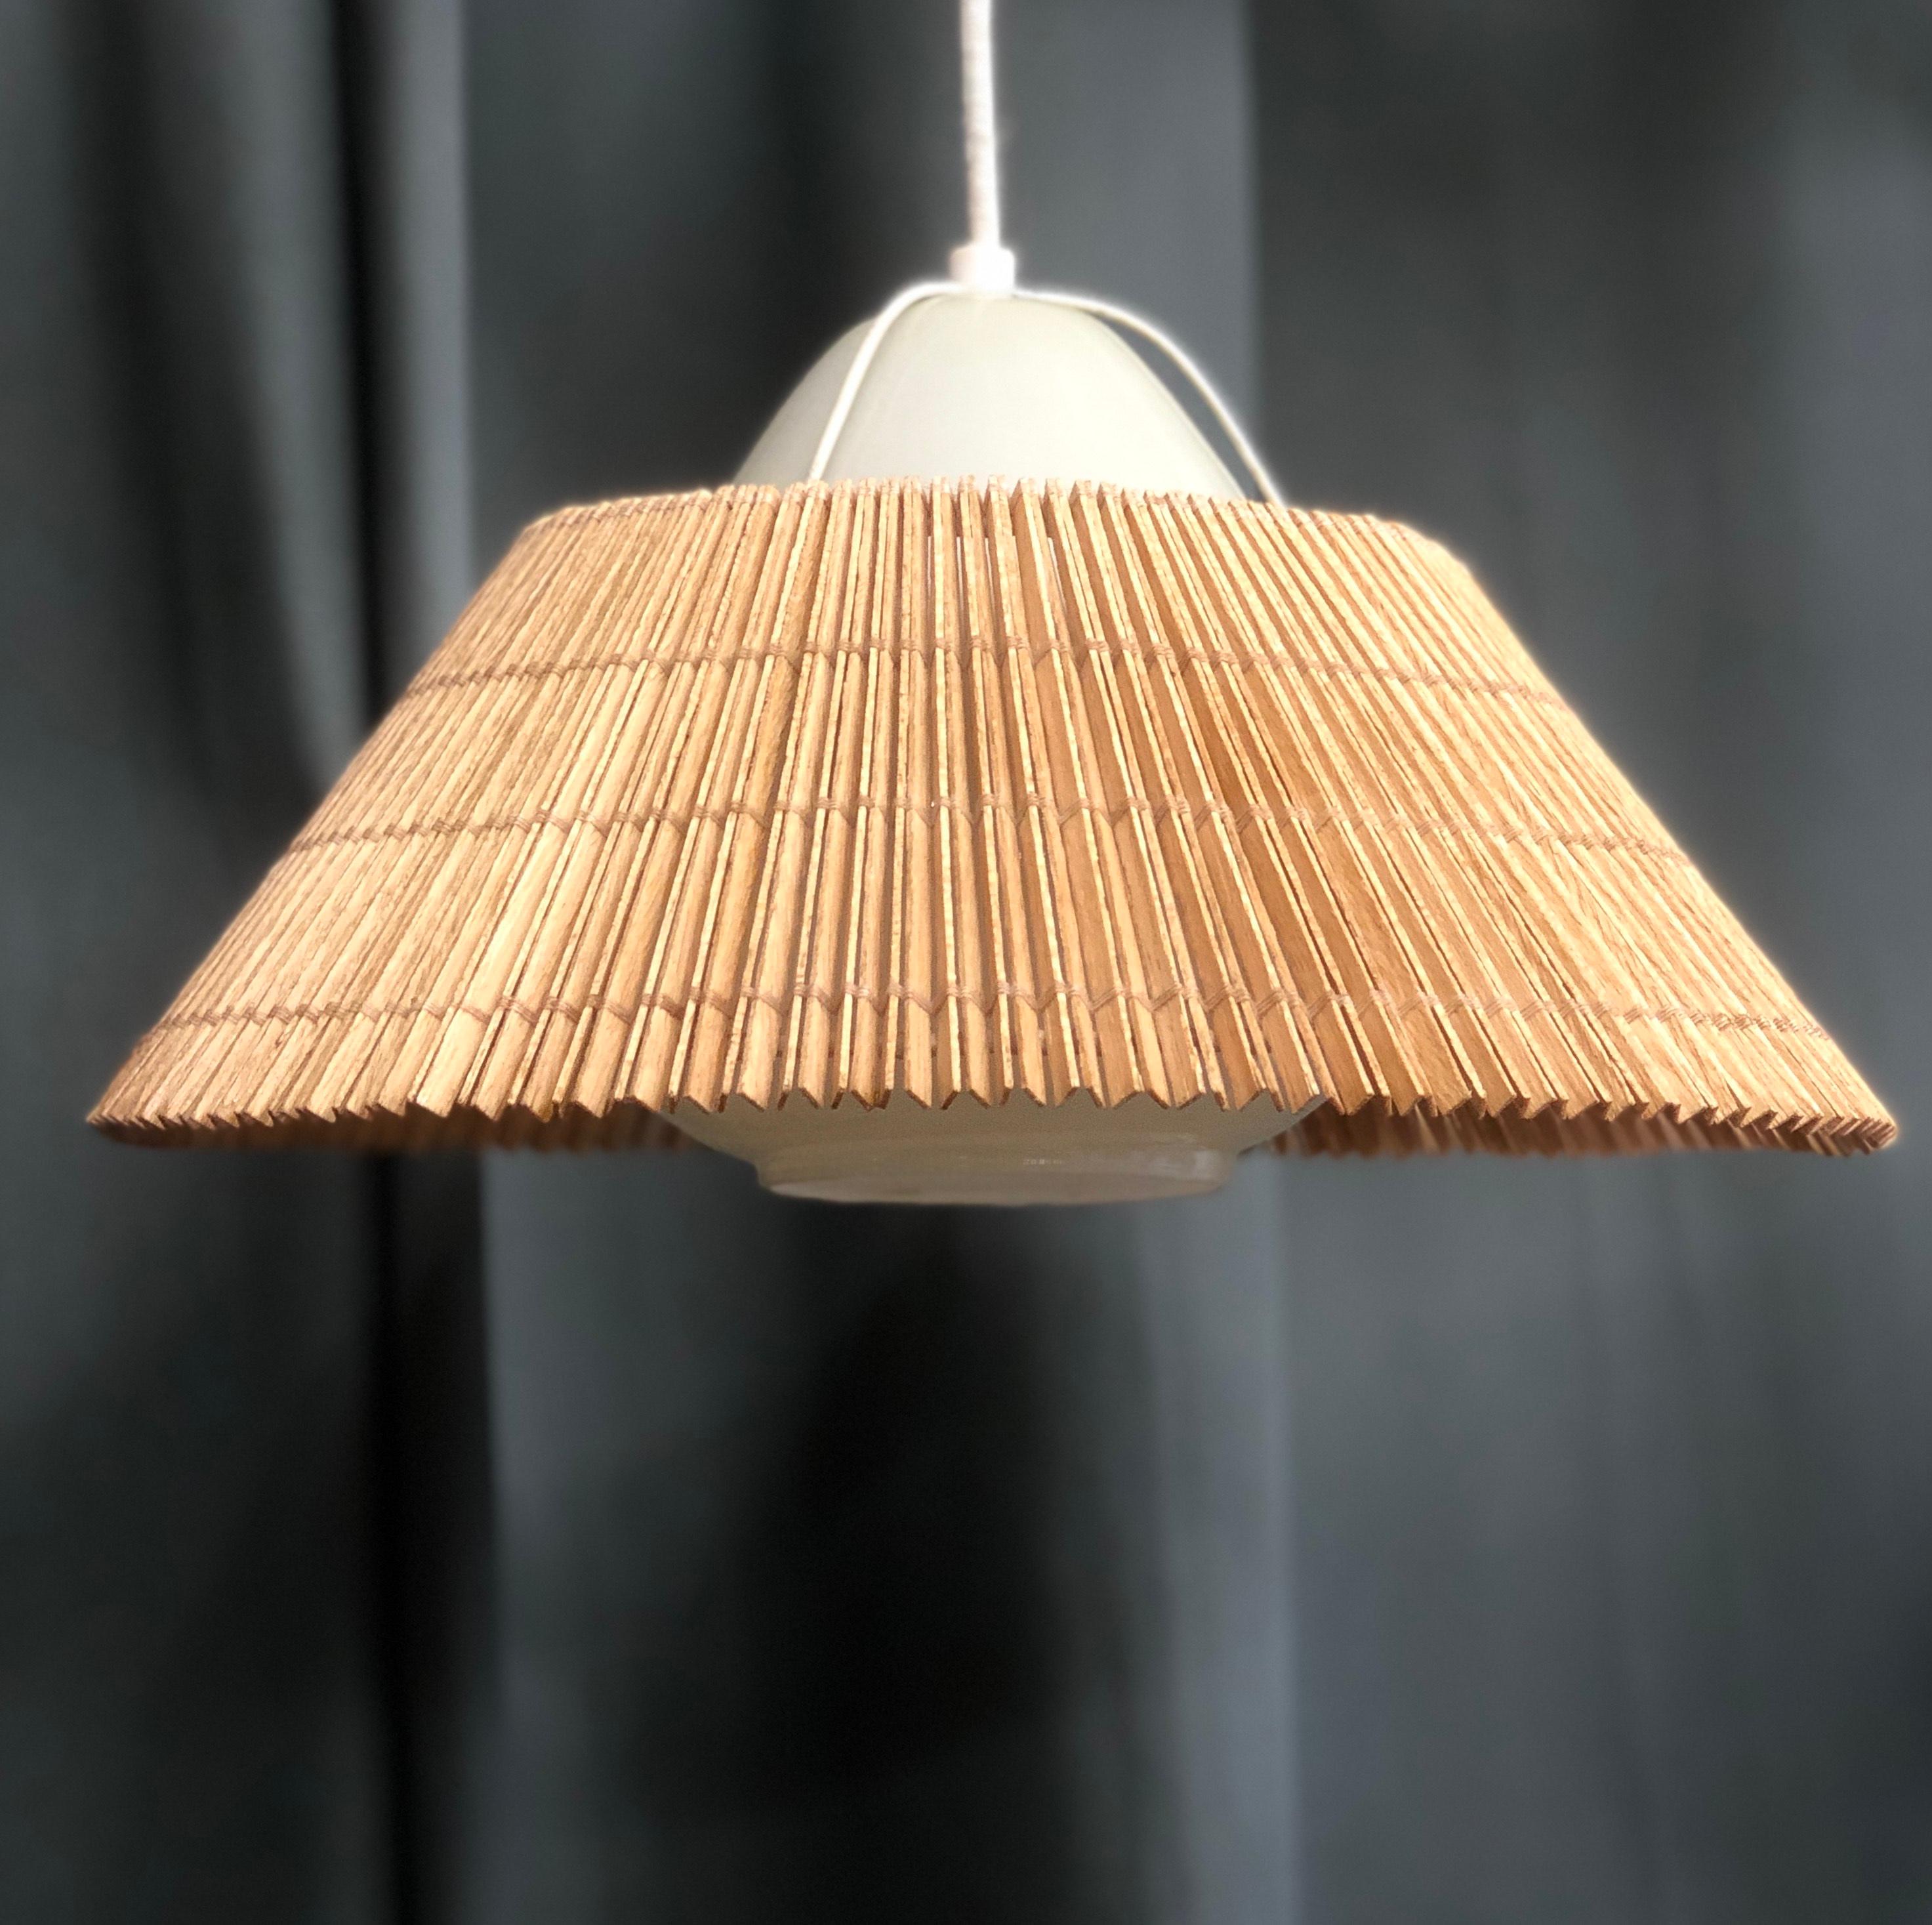 A vintage pendants designed by Lisa Johansson-Pape for Orno, Finland , Circa 1950th. Opaline glass defusers with wooden stripes shades.
Existing wires, rewiring available upon request. 2 fixtures available. Price is for each.